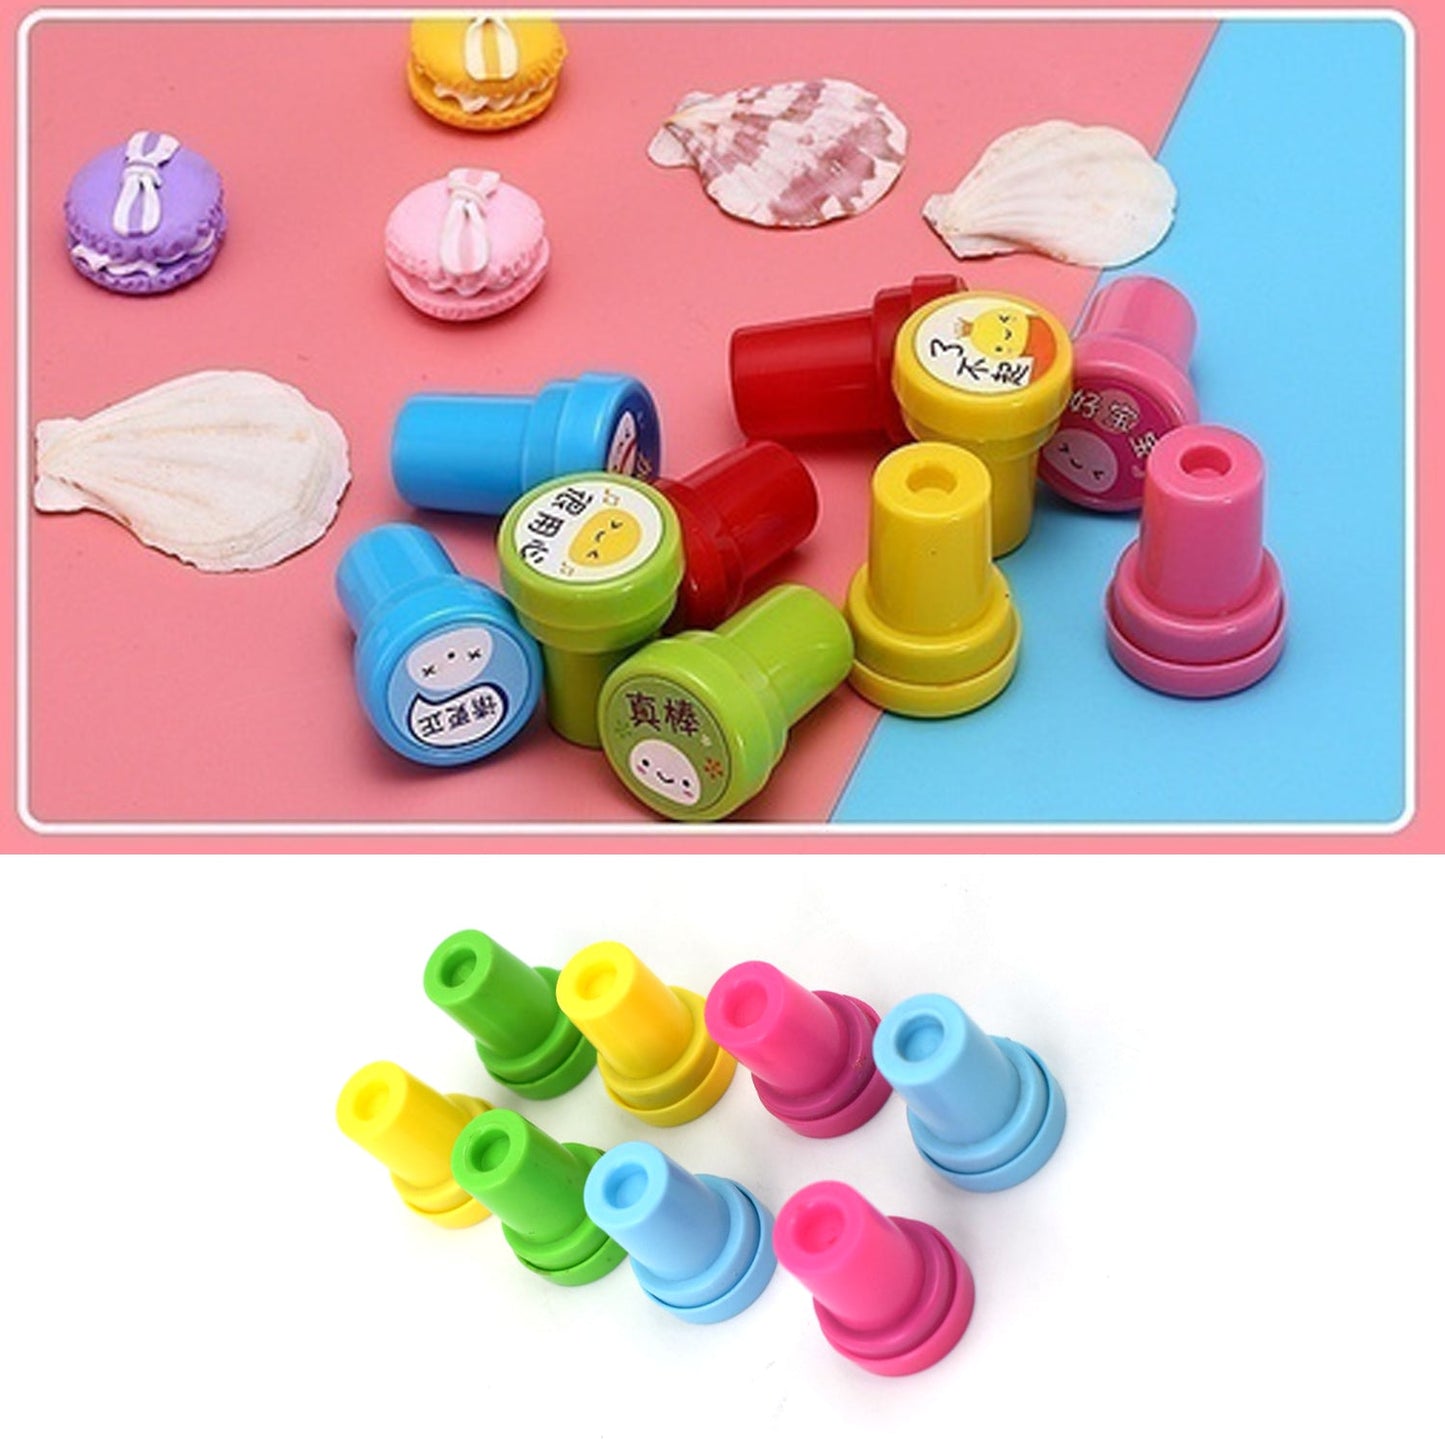 Emoticon Stamps 8 pieces in Round Shape Stamp for Kids Theme Stamps for School Craft & Prefect Gift for Teachers, Parents and Students (Multicolor)